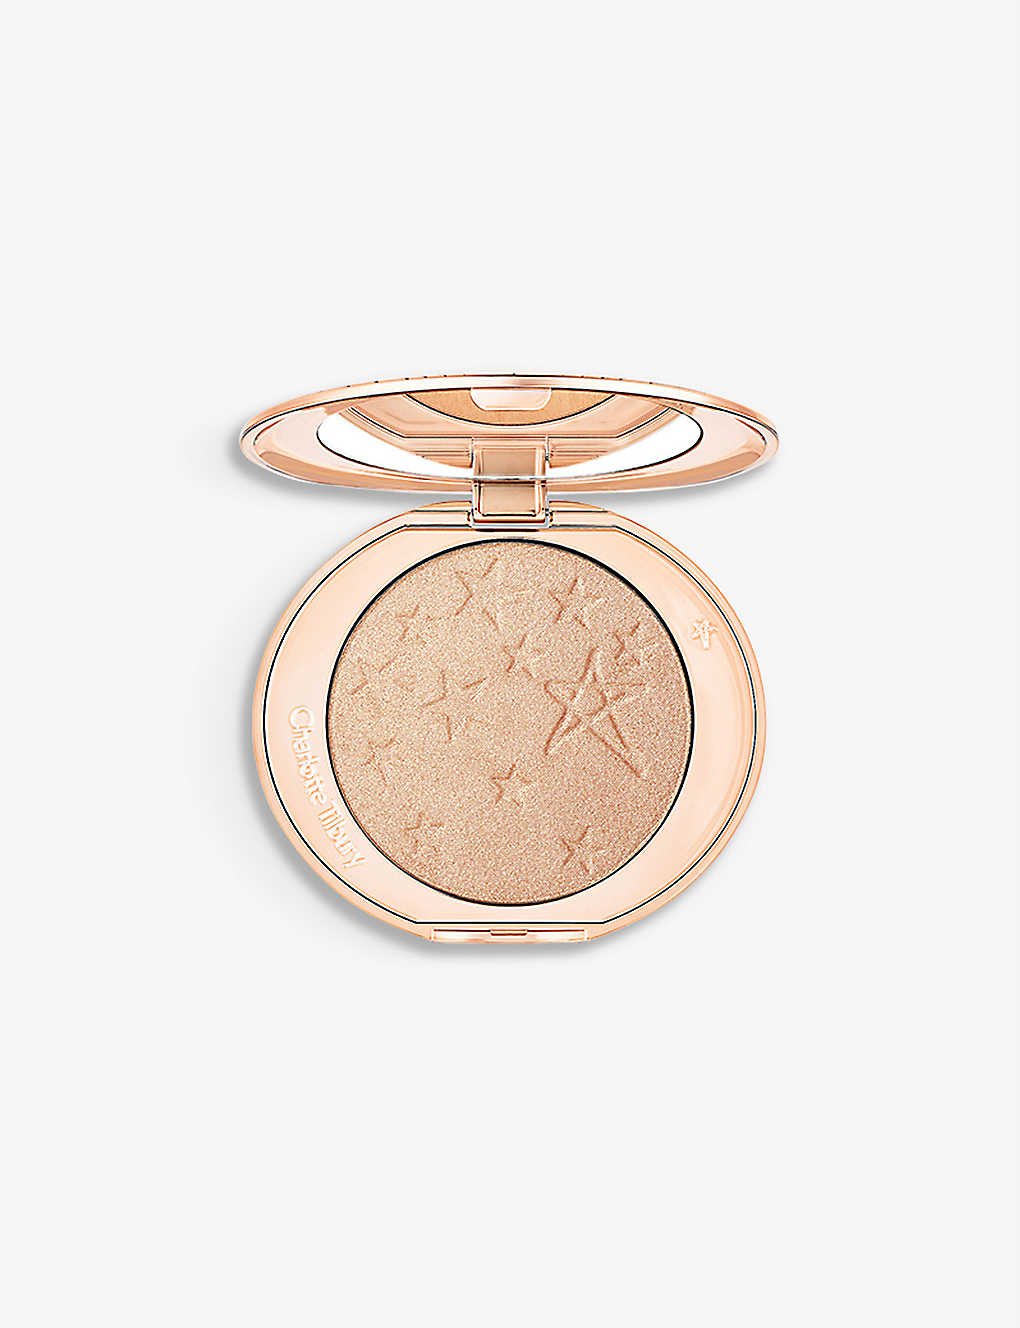 Charlotte Tilbury Champagne Glow Hollywood Glow Glide Highlighter 5.2g